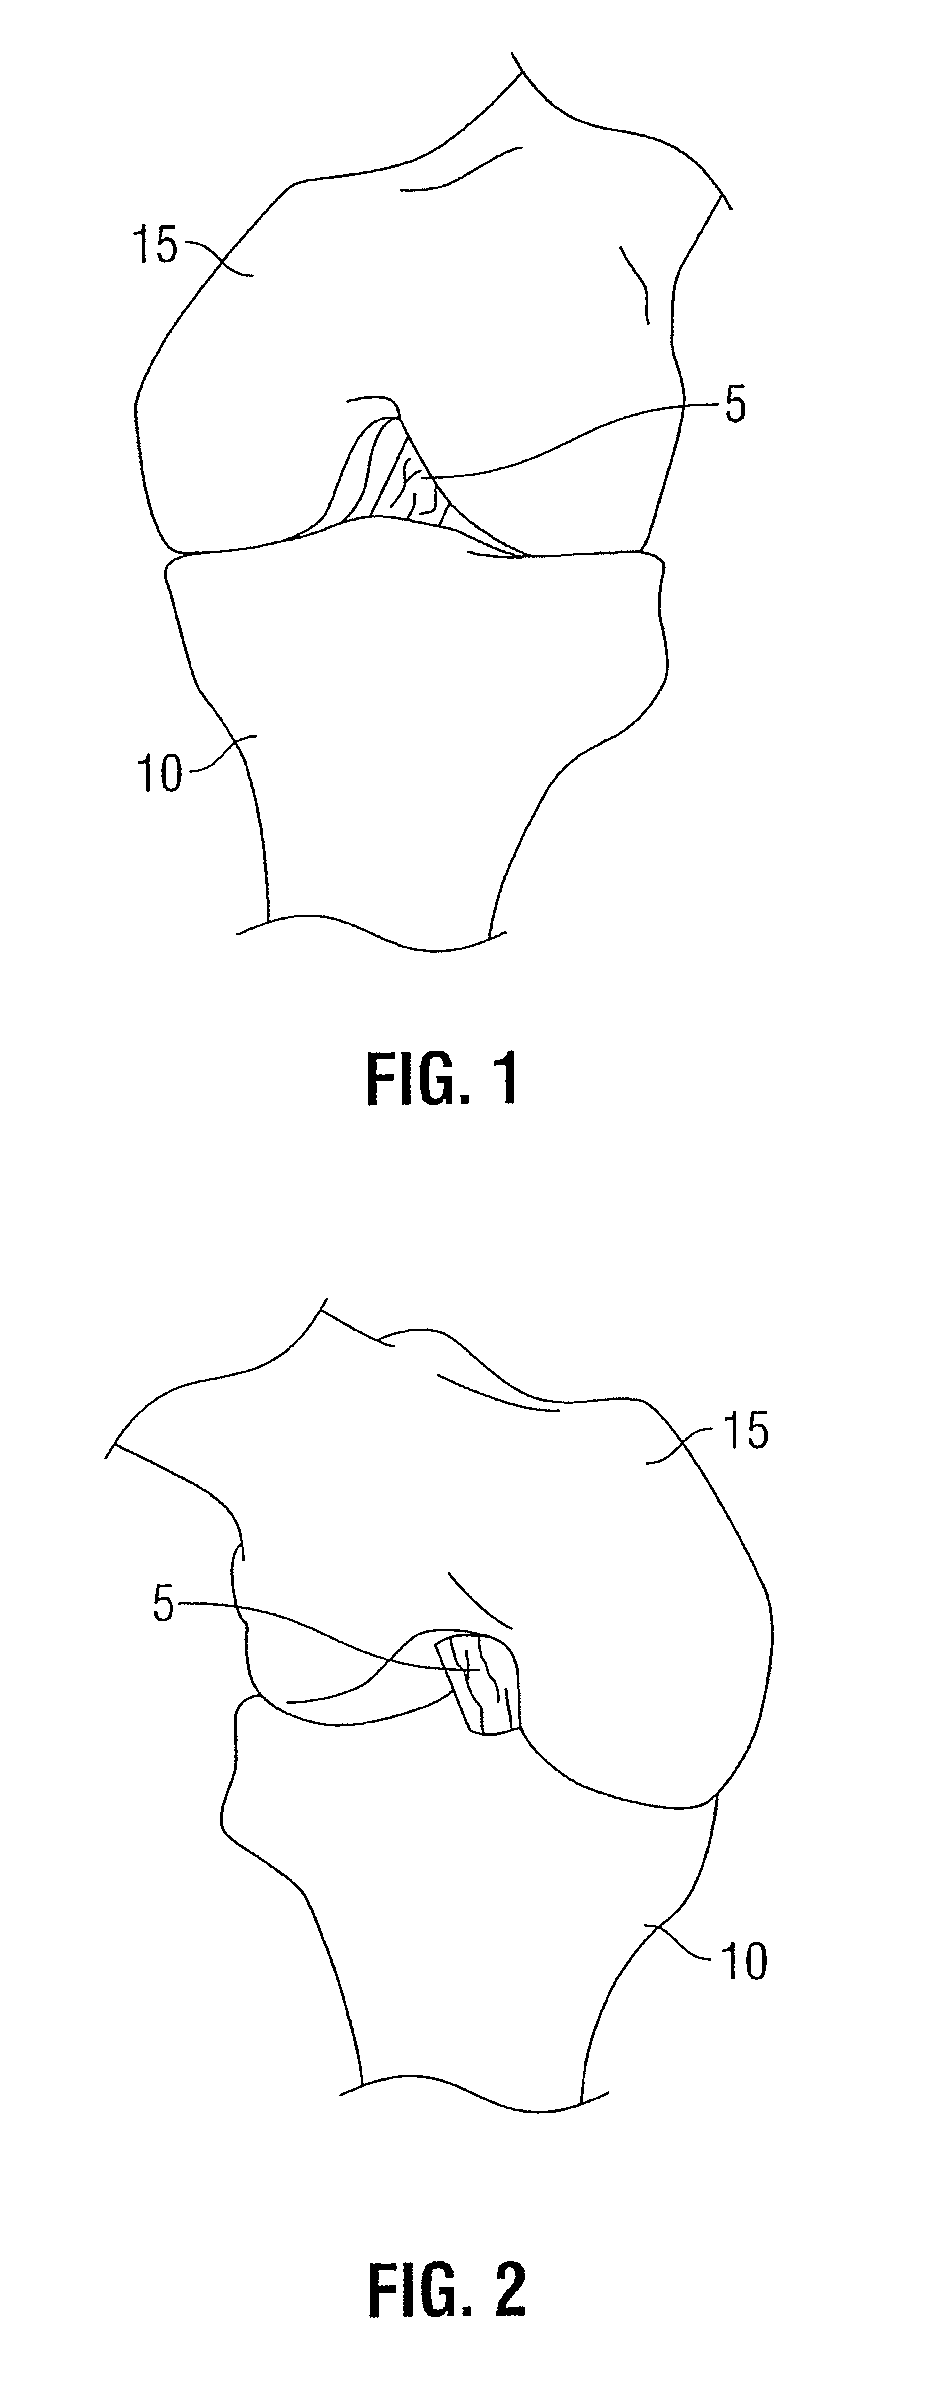 Femoral guide for ACL repair having adjustable offset